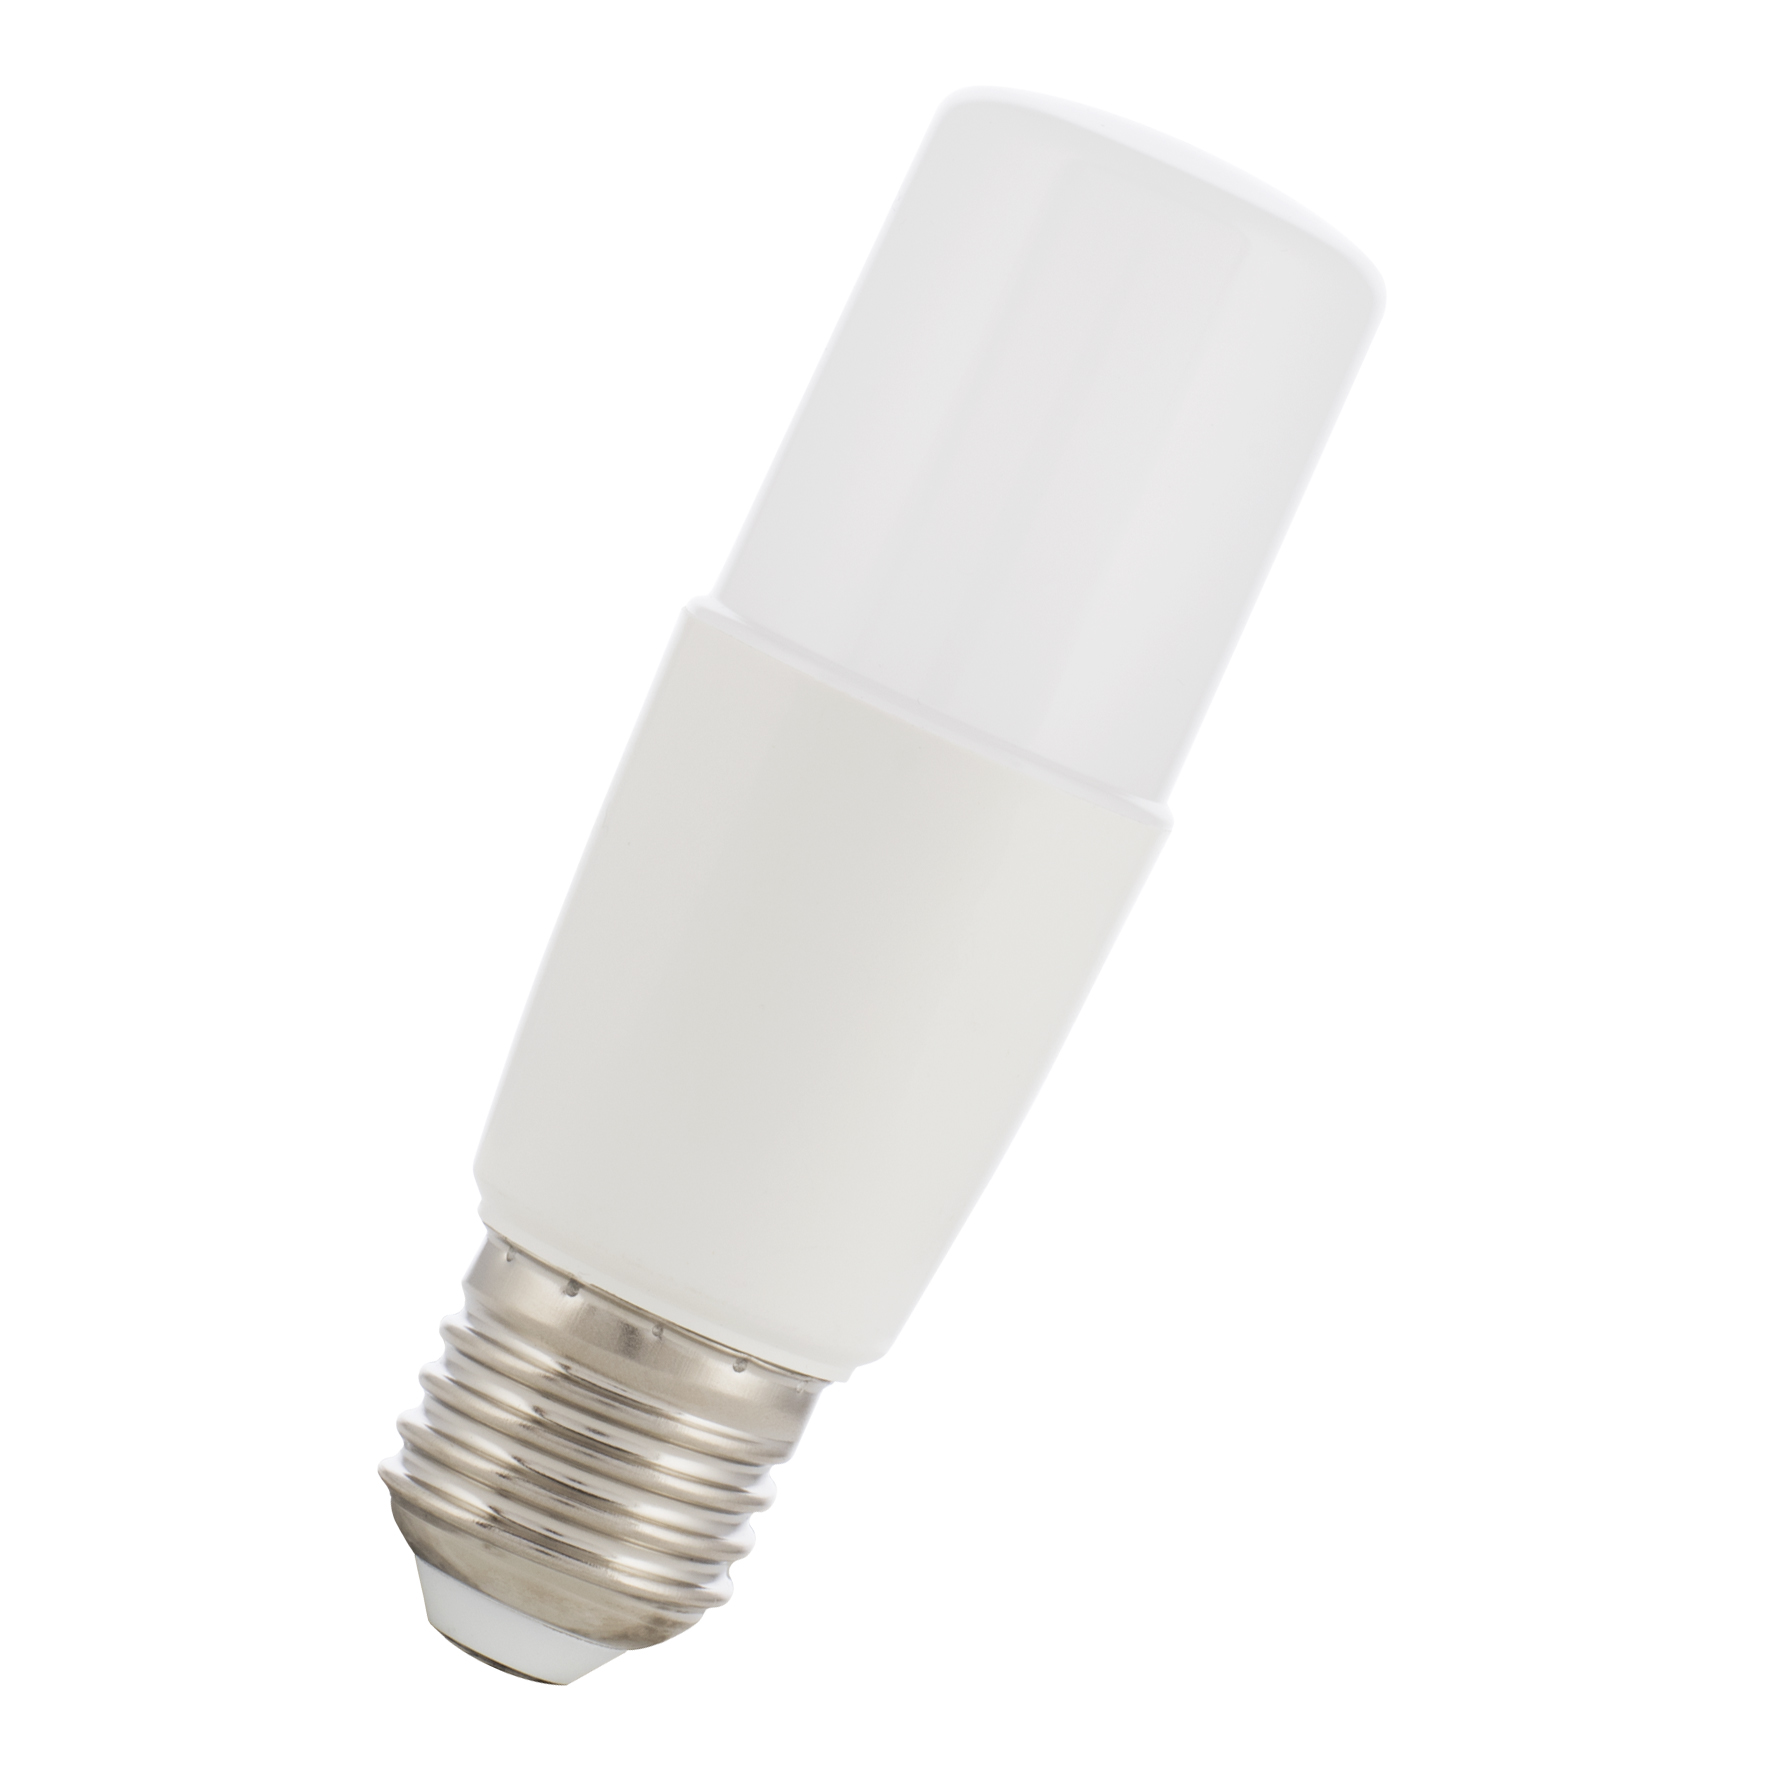 LED Ecobasic Compact T37 E27 7W (50W) 640lm 840